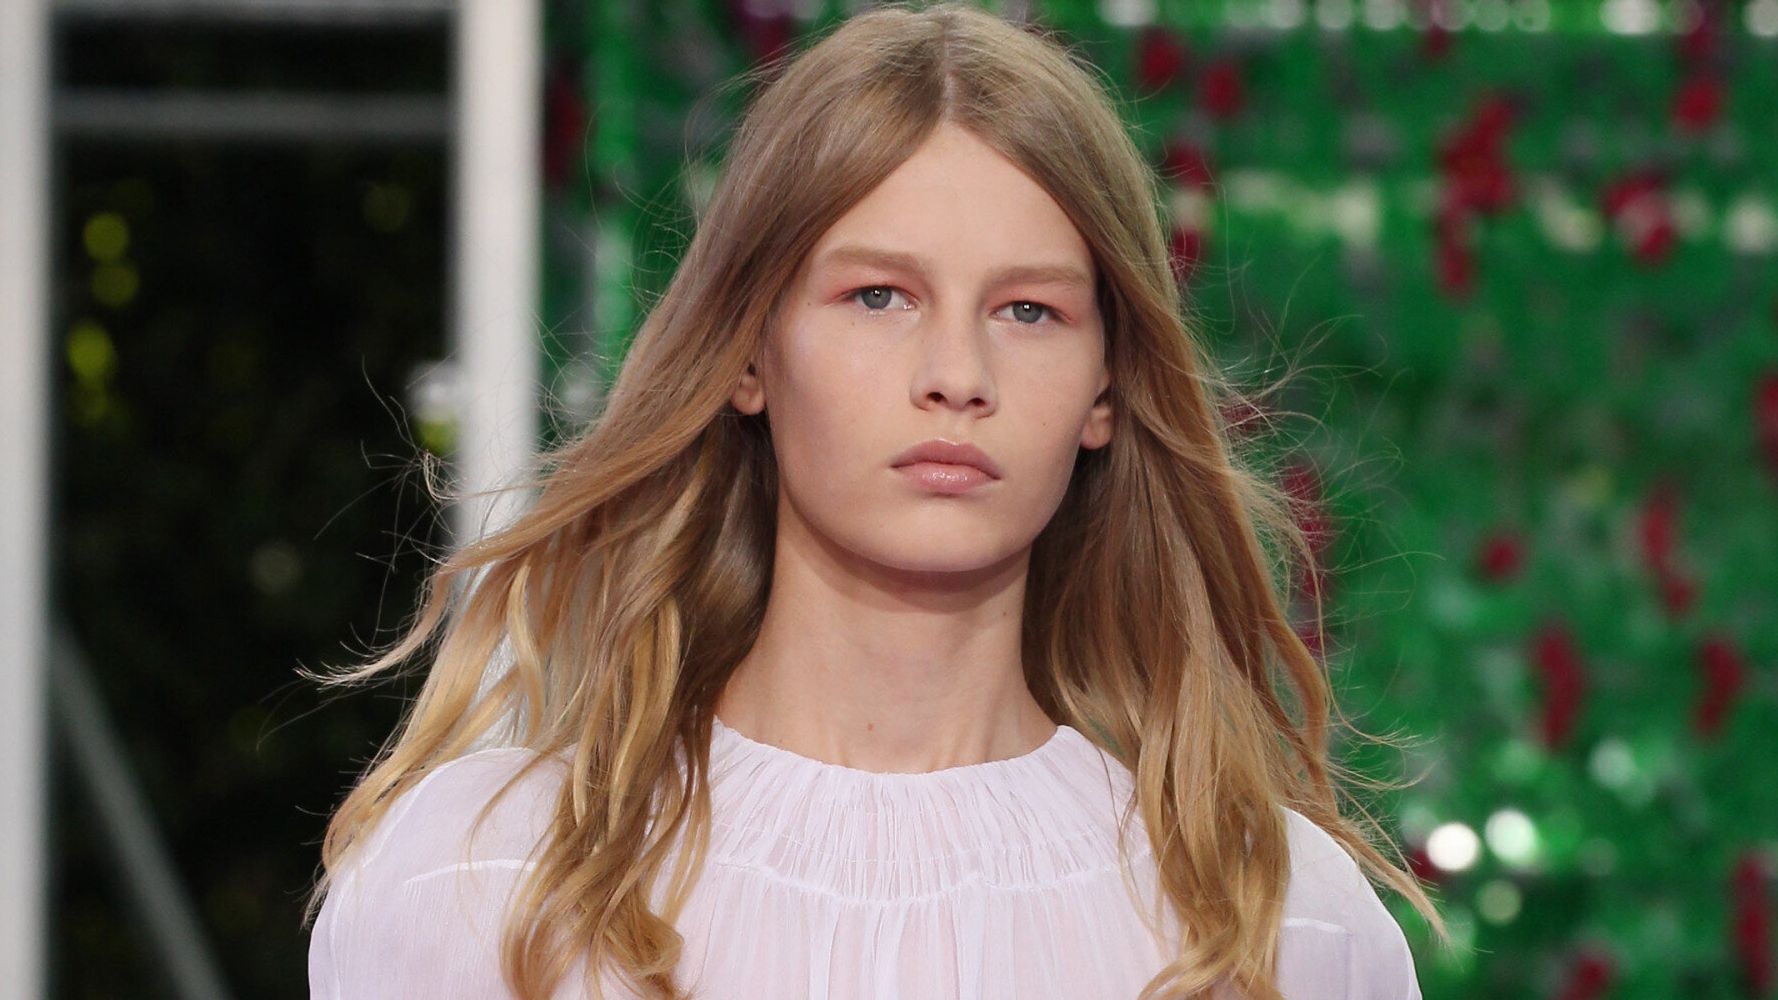 Outrage As 14 Year Old Dior Model Sofia Mechetner Wears Sheer Dress On The Catwalk Huffpost Uk 4900